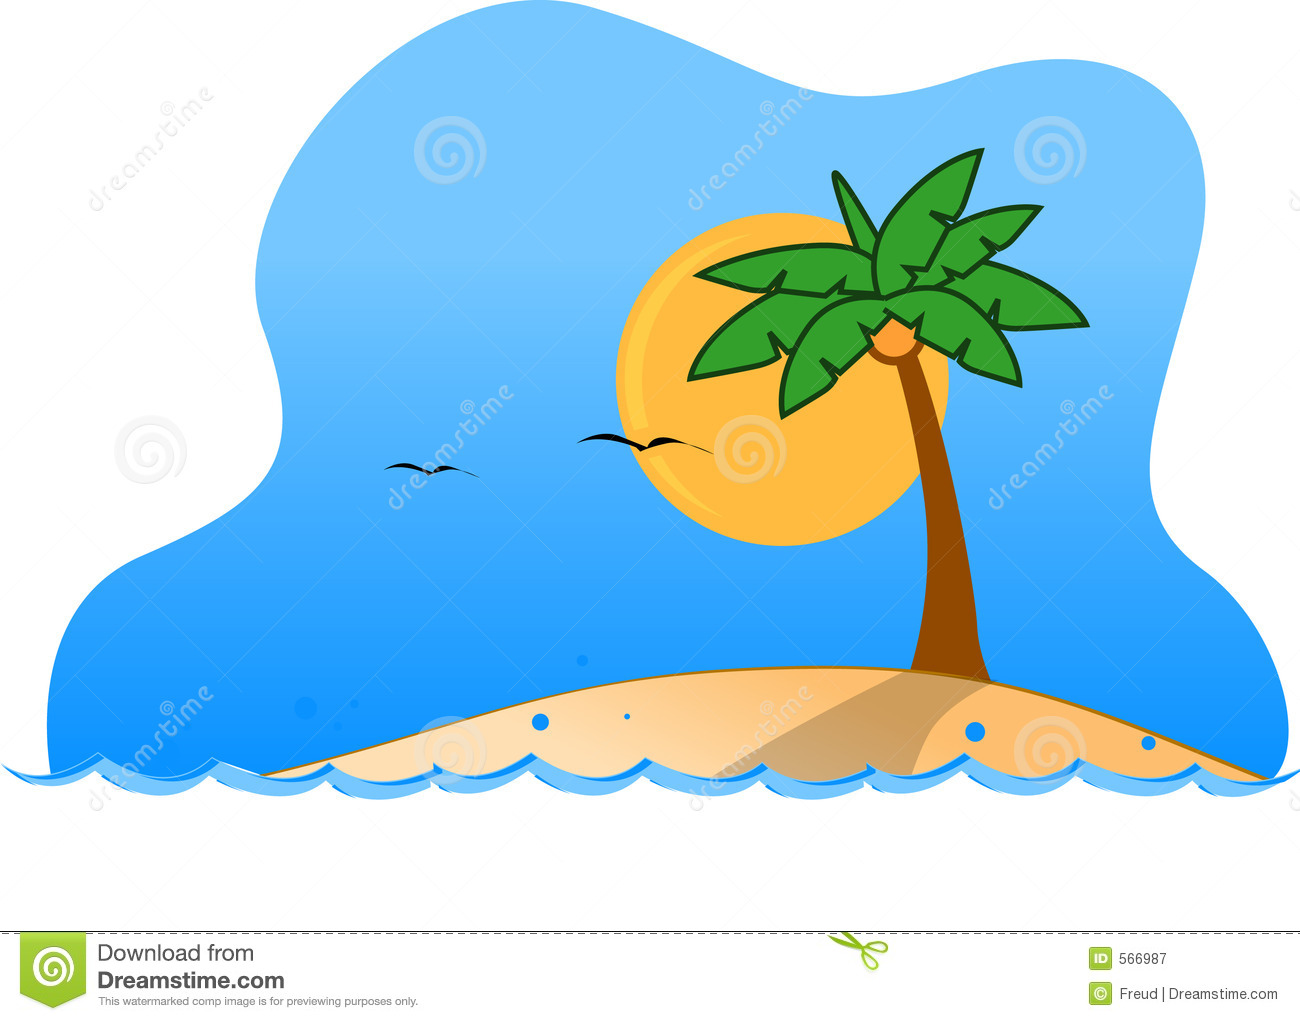 Tropical Island Royalty Free Stock Photography   Image  566987